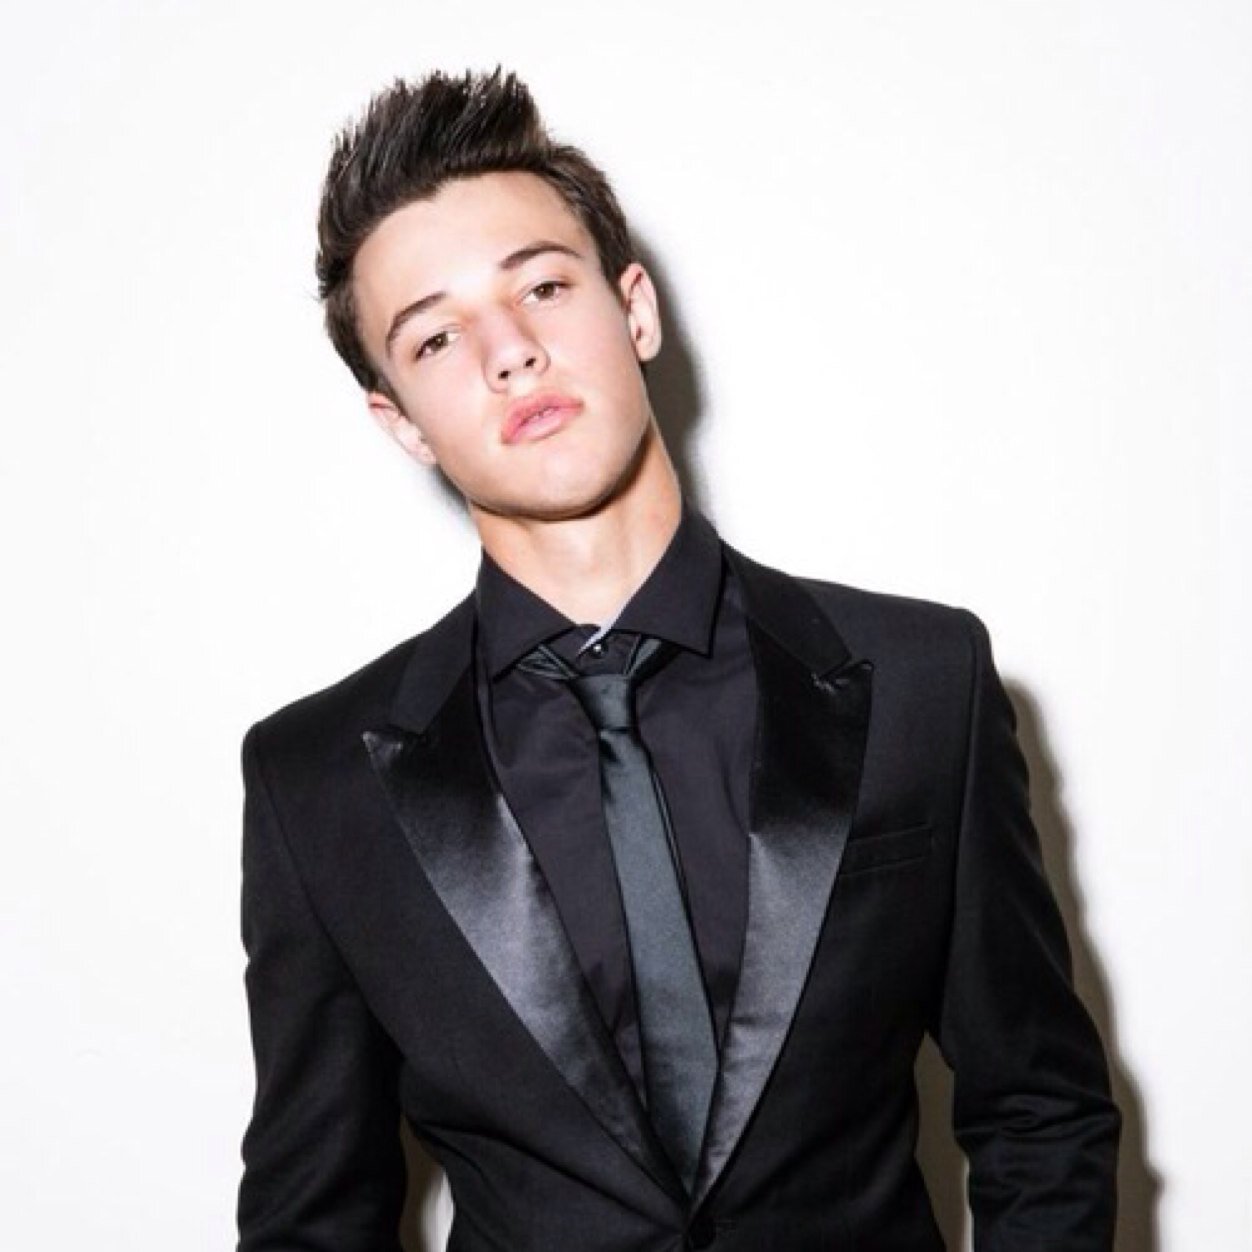 The 29-year old son of father (?) and mother Gina Cameron Dallas in 2024 photo. Cameron Dallas earned a  million dollar salary - leaving the net worth at 1 million in 2024